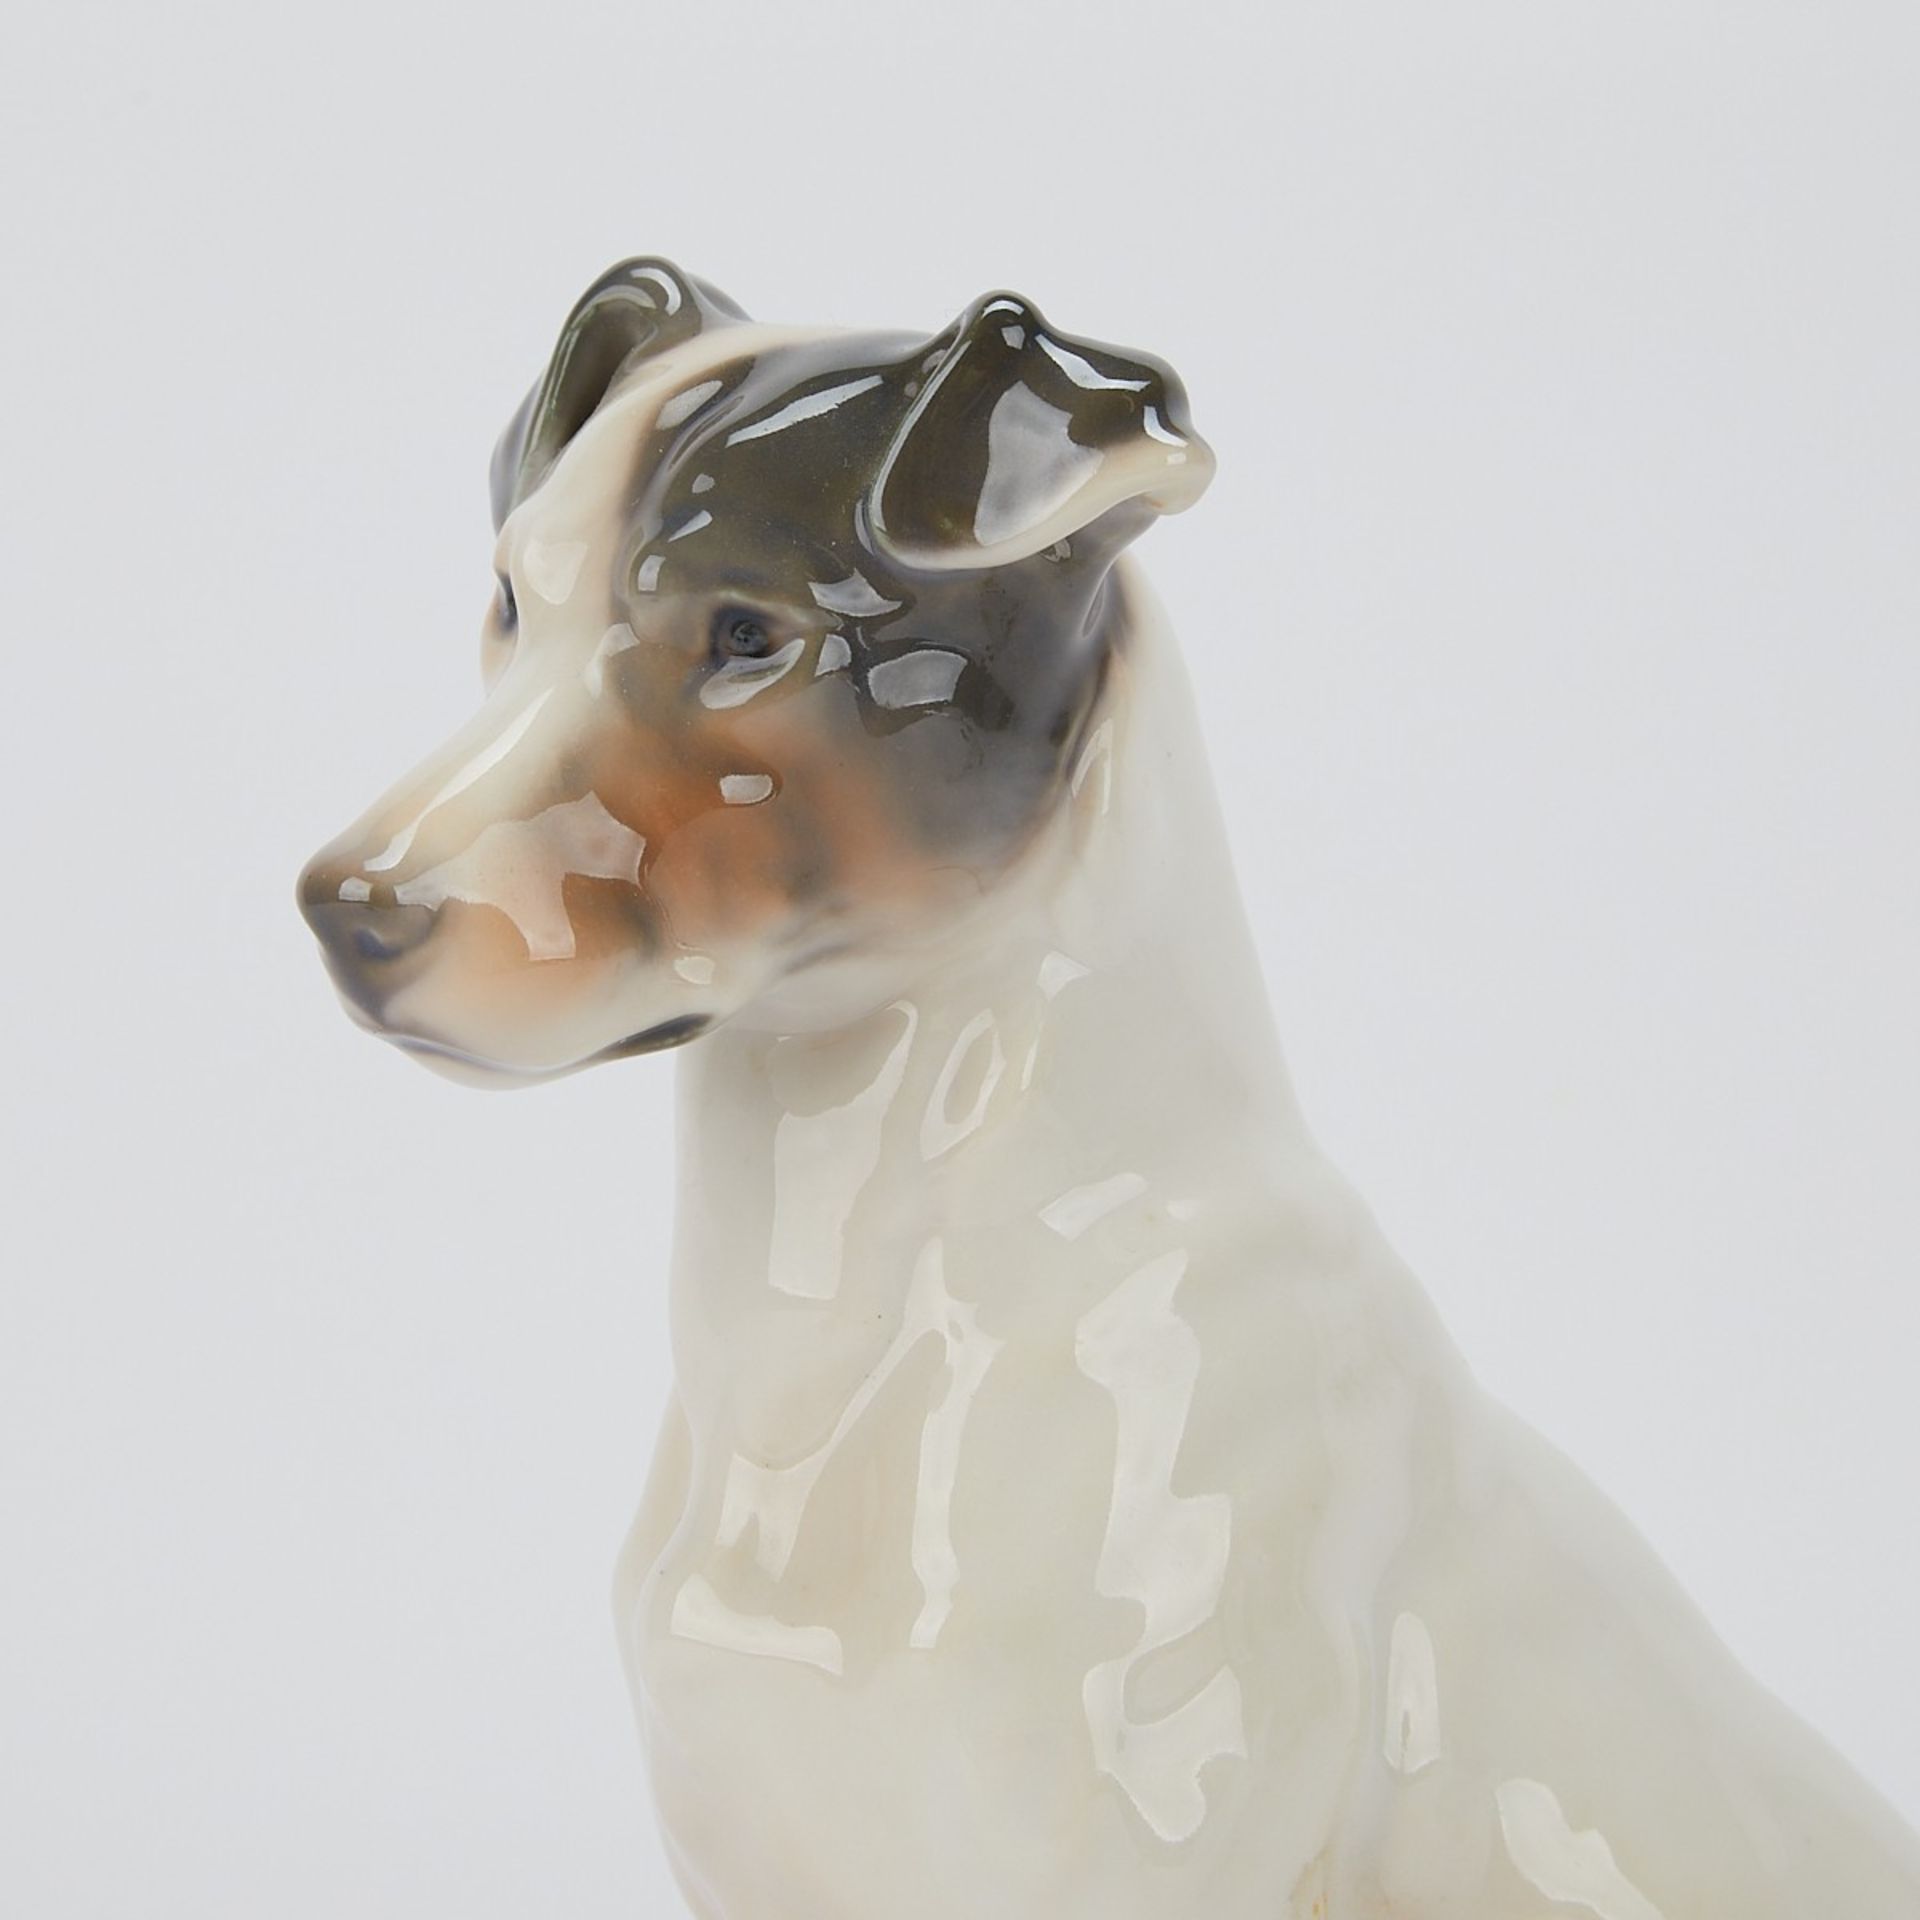 Group of 3 Porcelain Animals - Dogs and Fox - Image 8 of 13